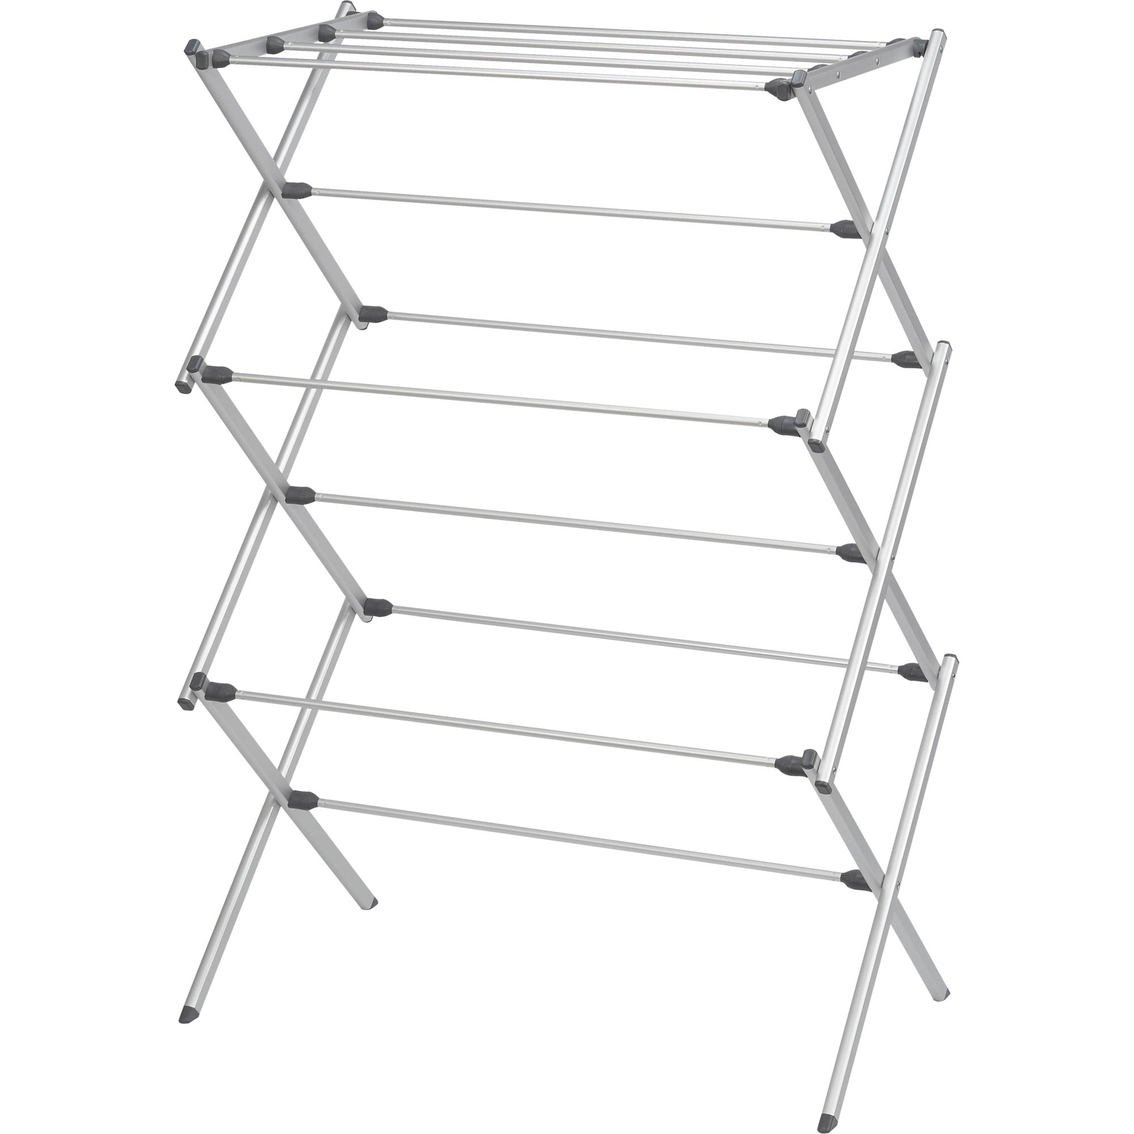 Woolite Compact Drying Rack, Laundry, Household